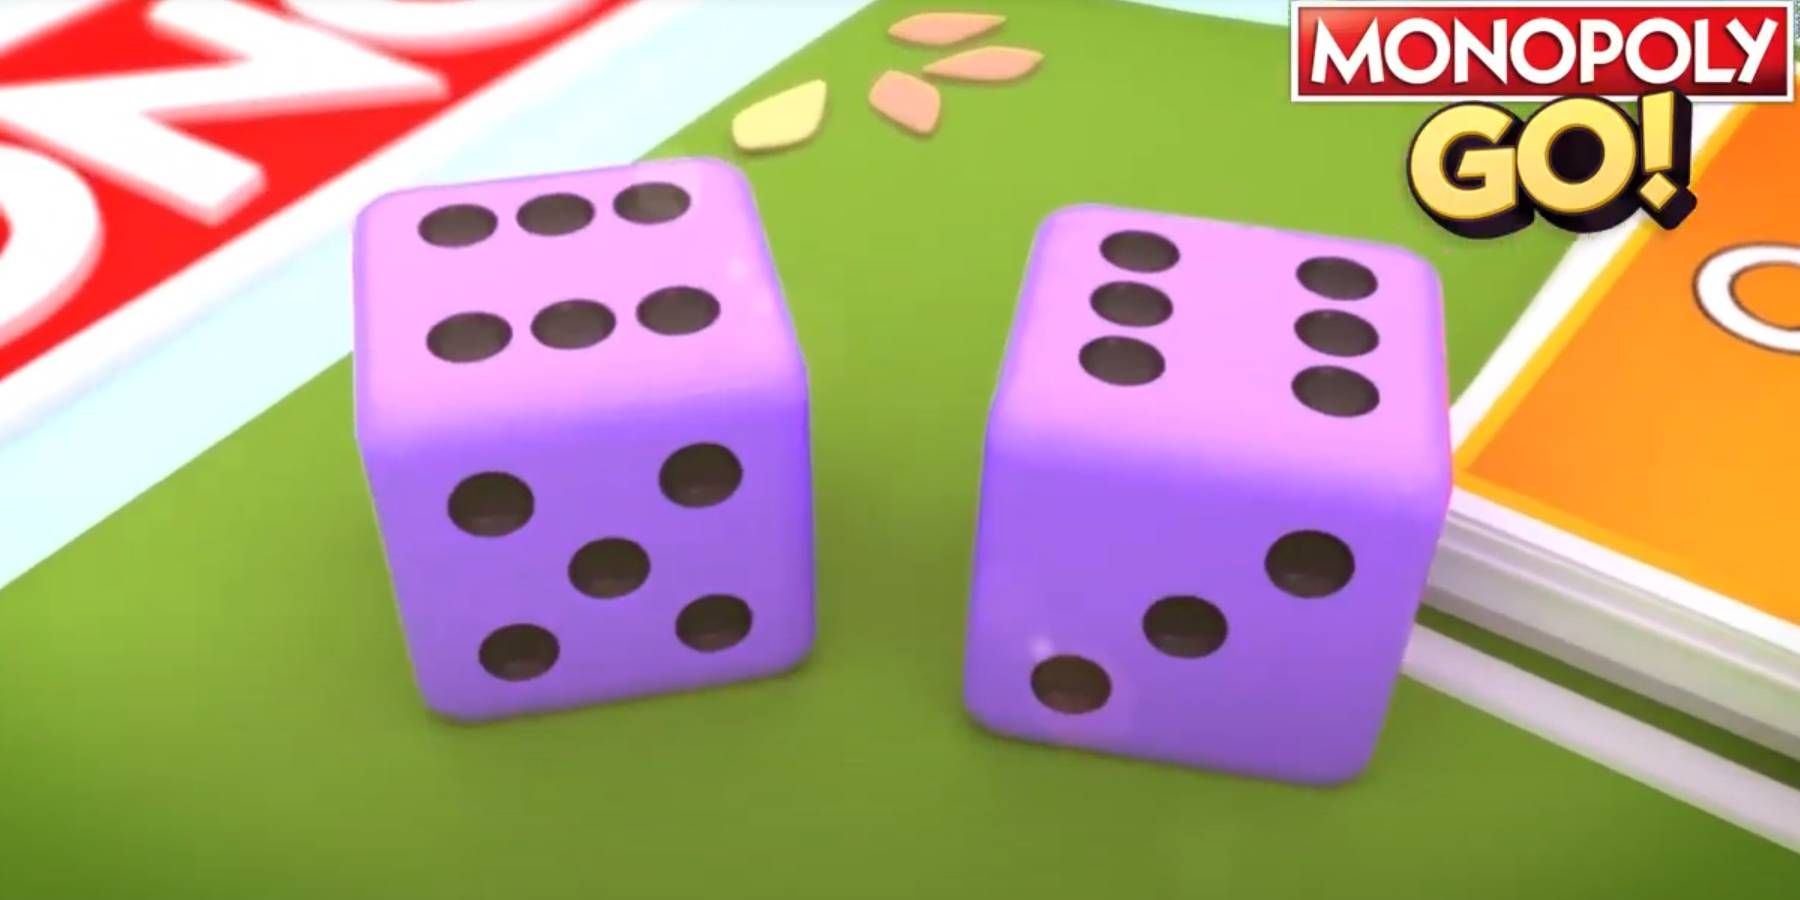 Monopoly GO purple dice being rolled to move piece across the game board